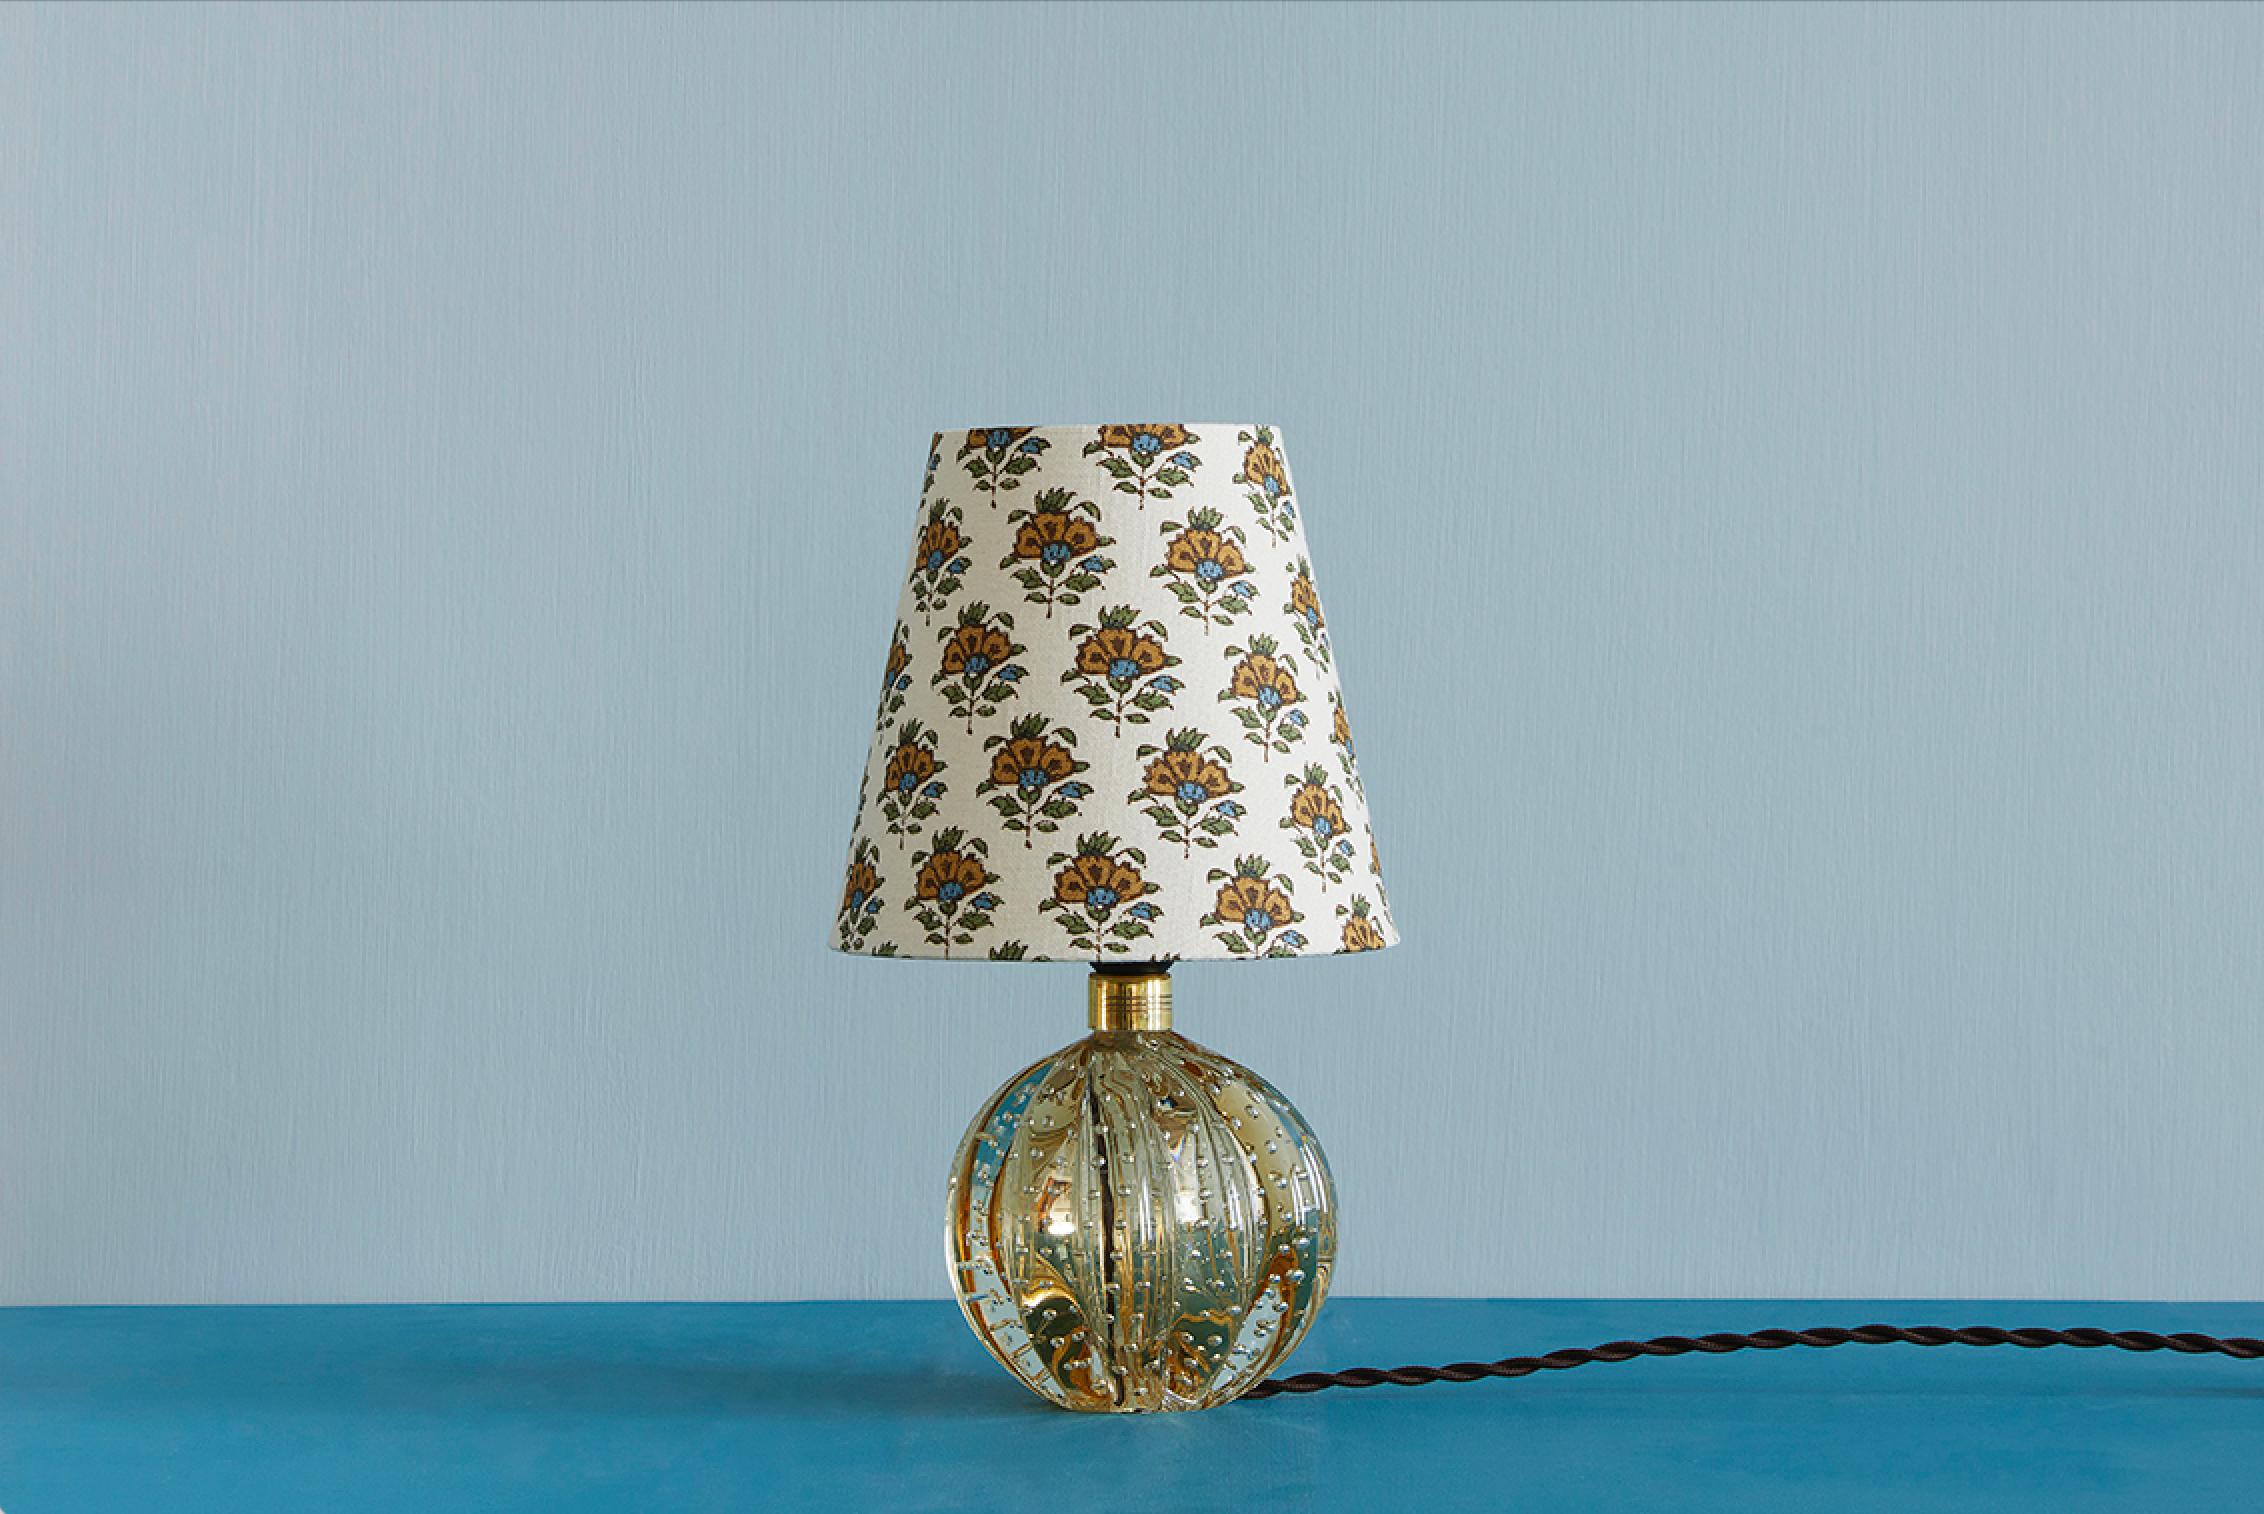 Italy, 1950's

Murano table lamp in champagne coloured glass with customized shade by The Apartment.

H 28 x Ø 16 cm